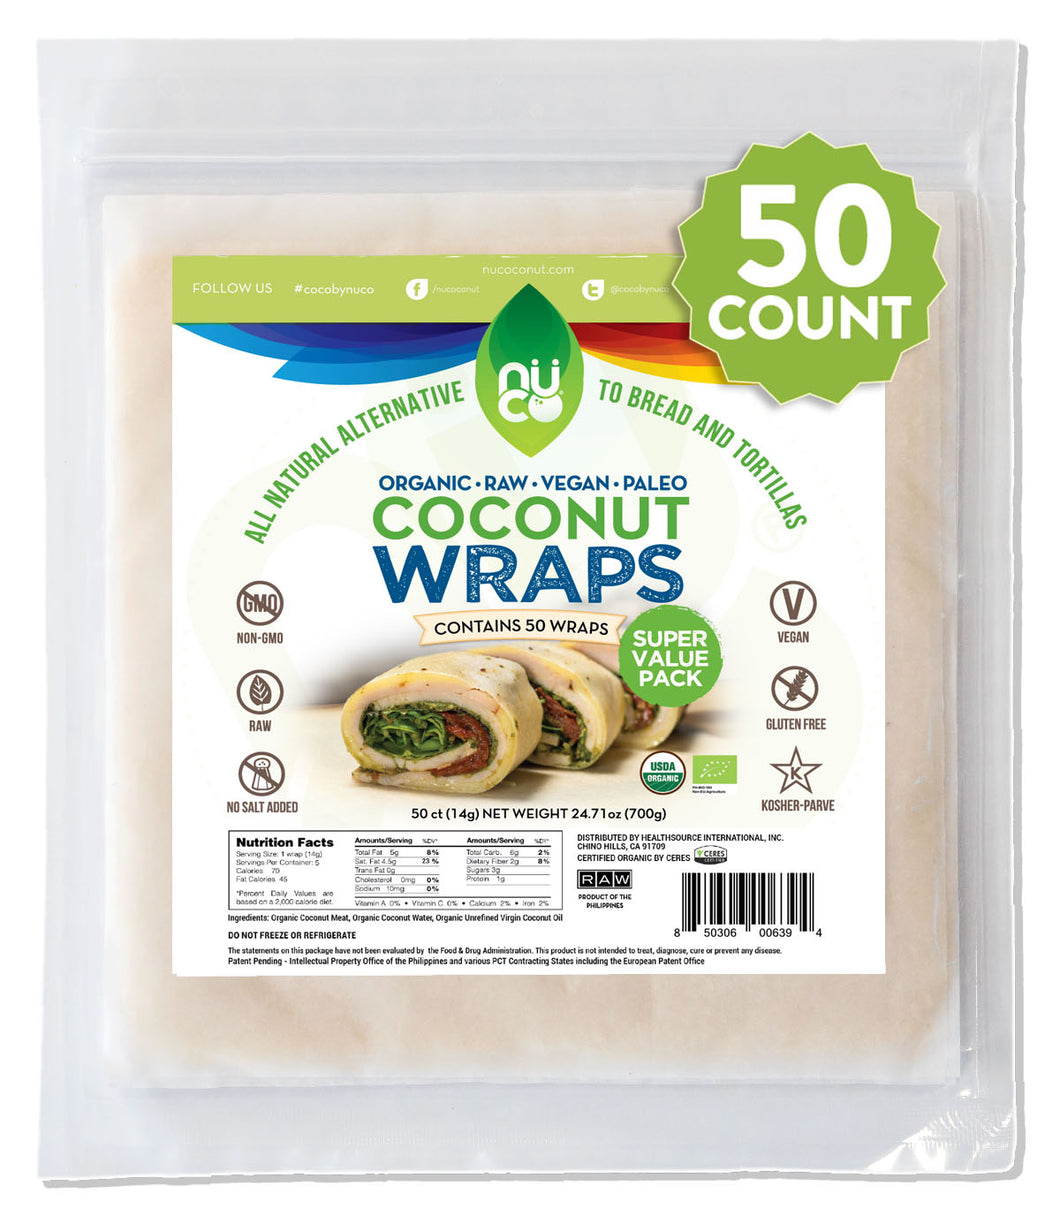 NUCO Coconut Wraps Value Pack, 50 Count | Available on Amazon Prime